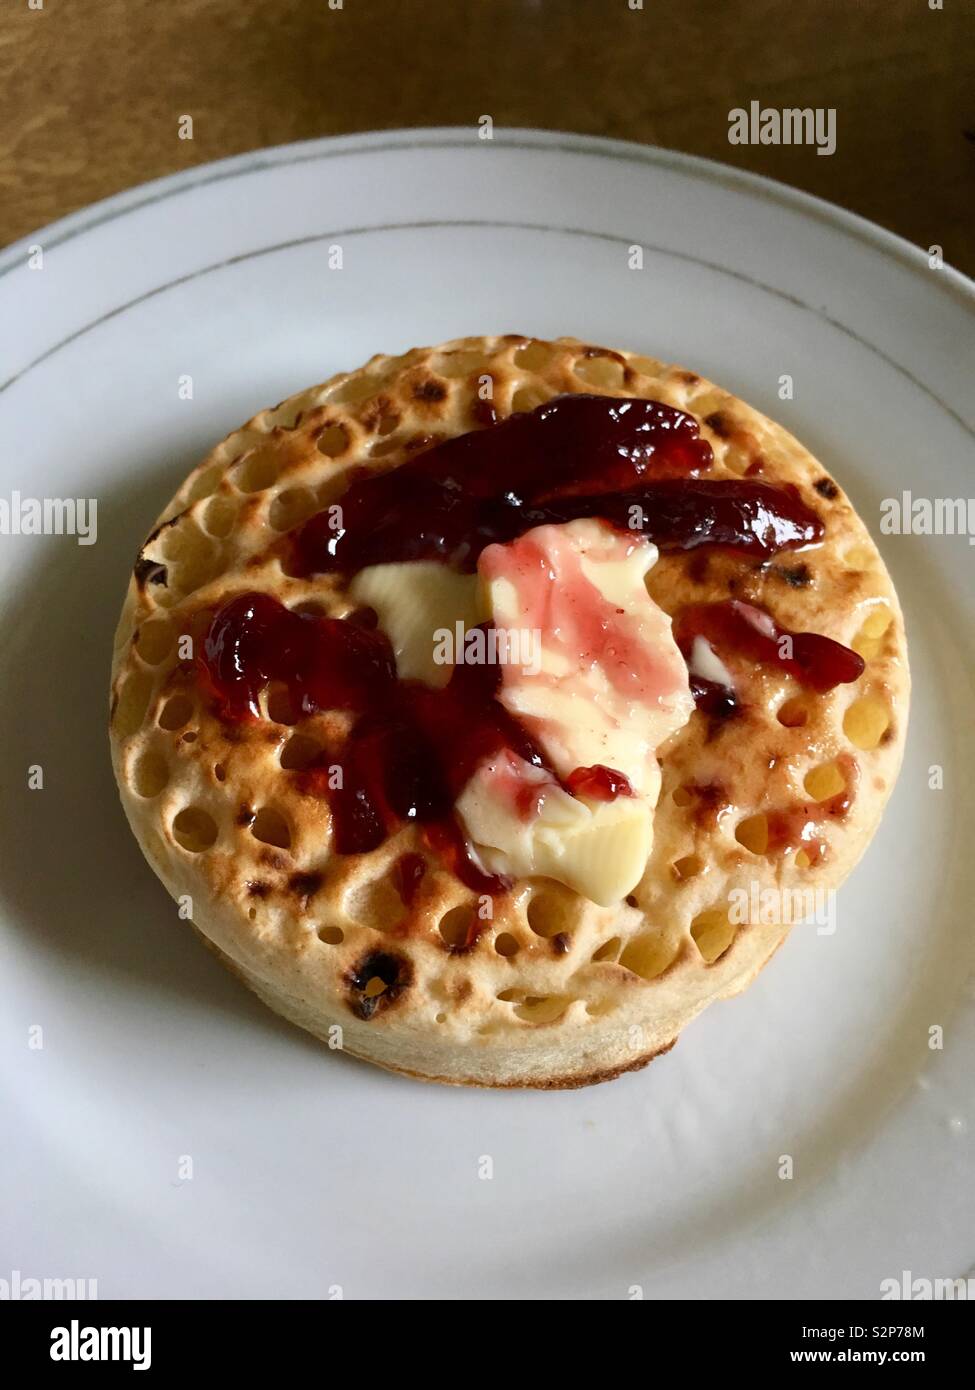 Jam and butter on top of a crumpet Stock Photo